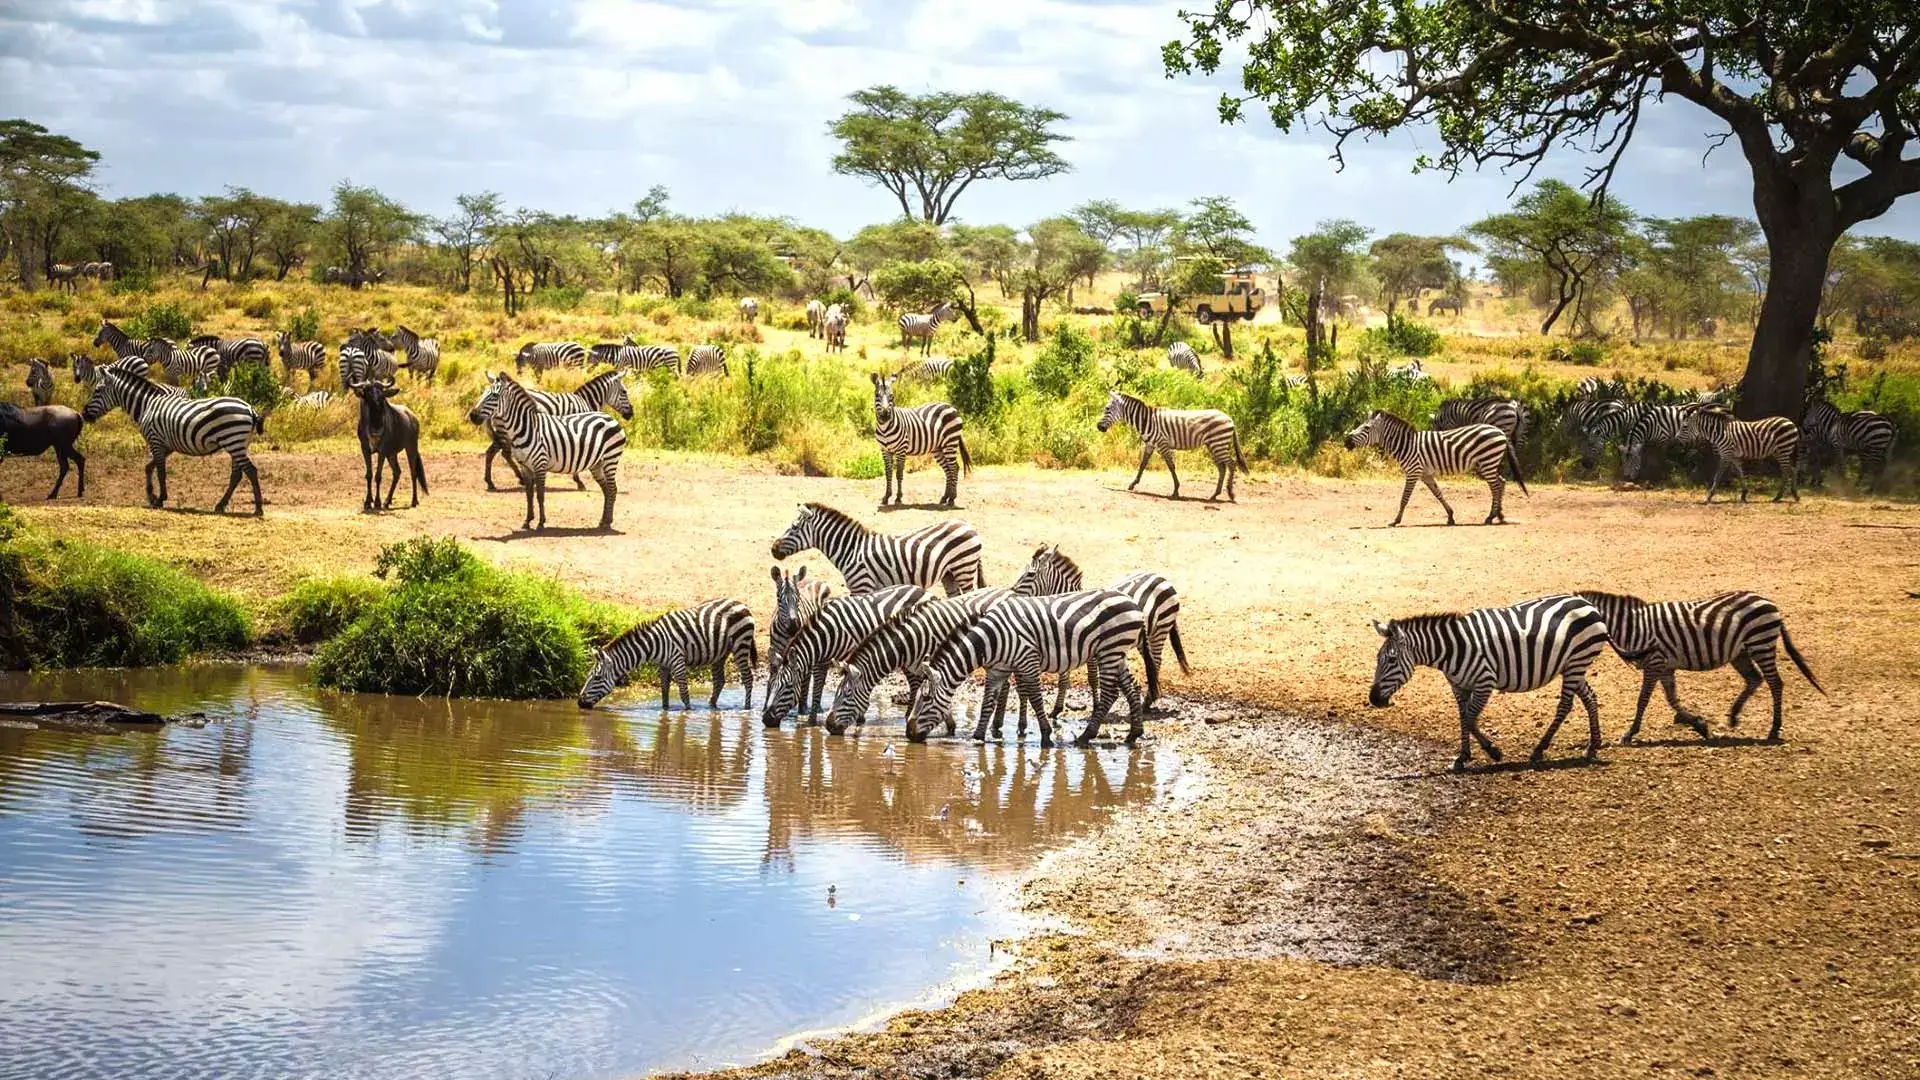 a group of Zebras having water in the lake.